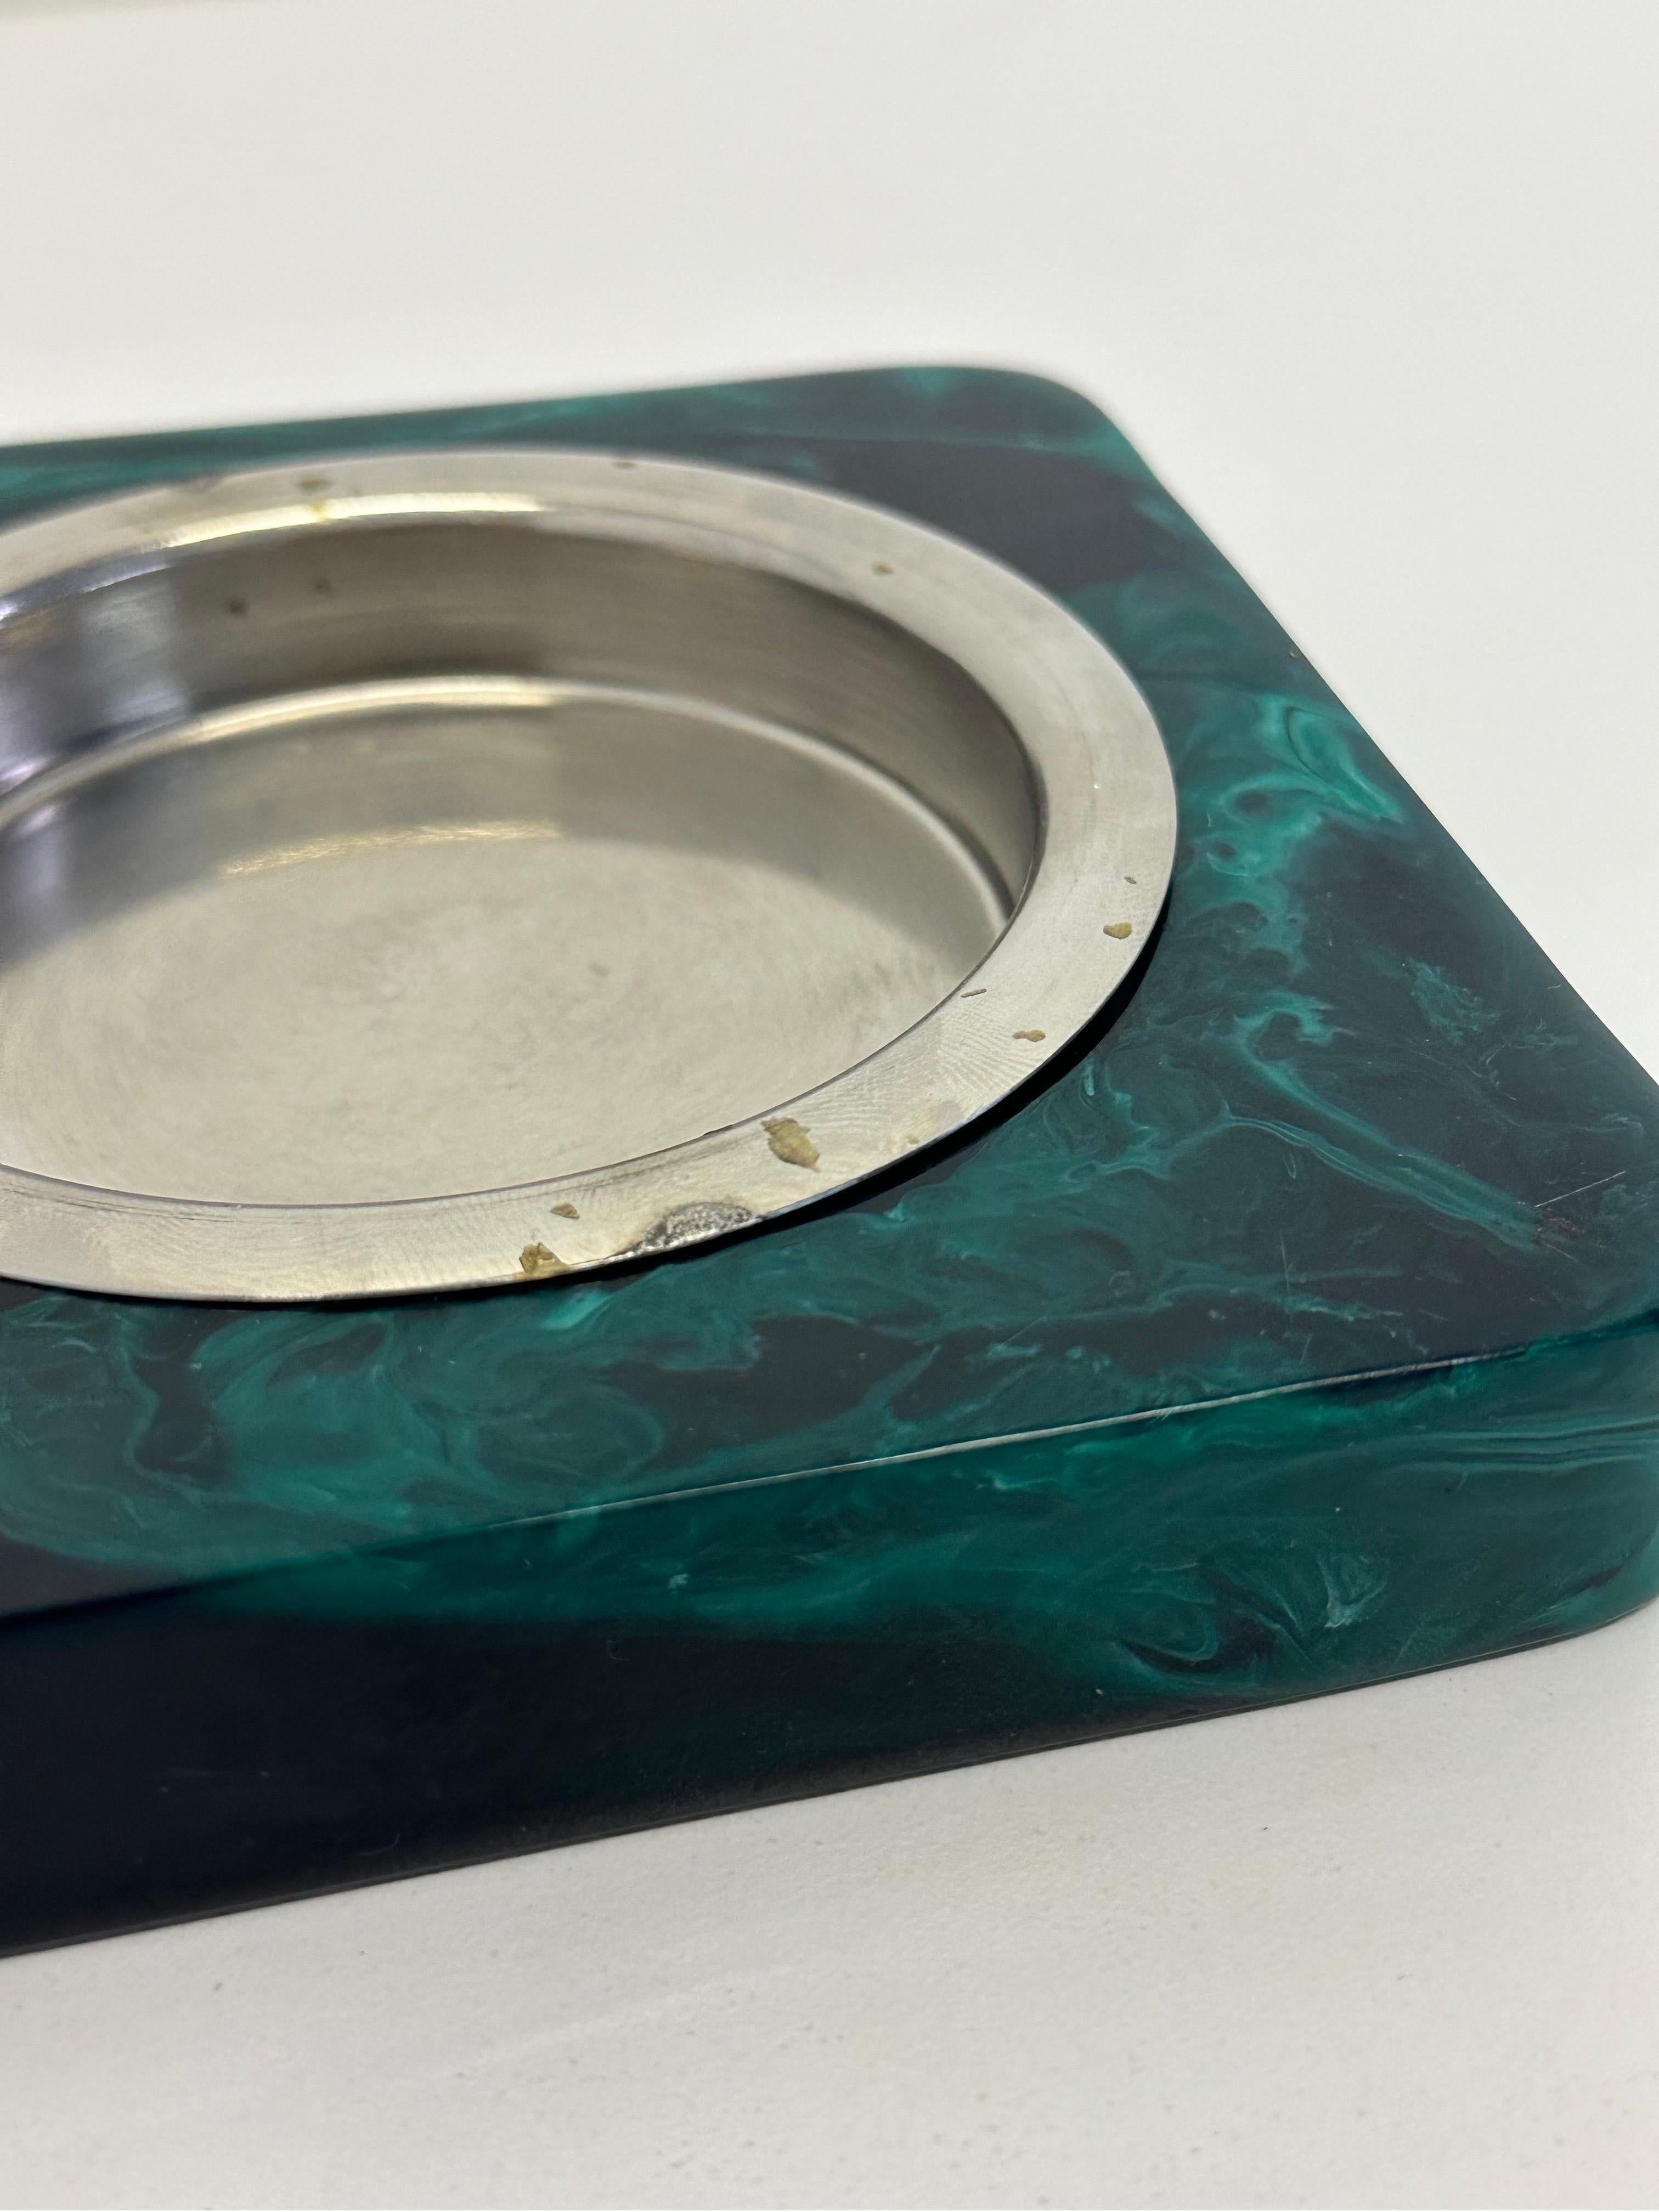 Brazilian Modern Faux Malachite Resin Tray or Catchall, 1960s For Sale 3